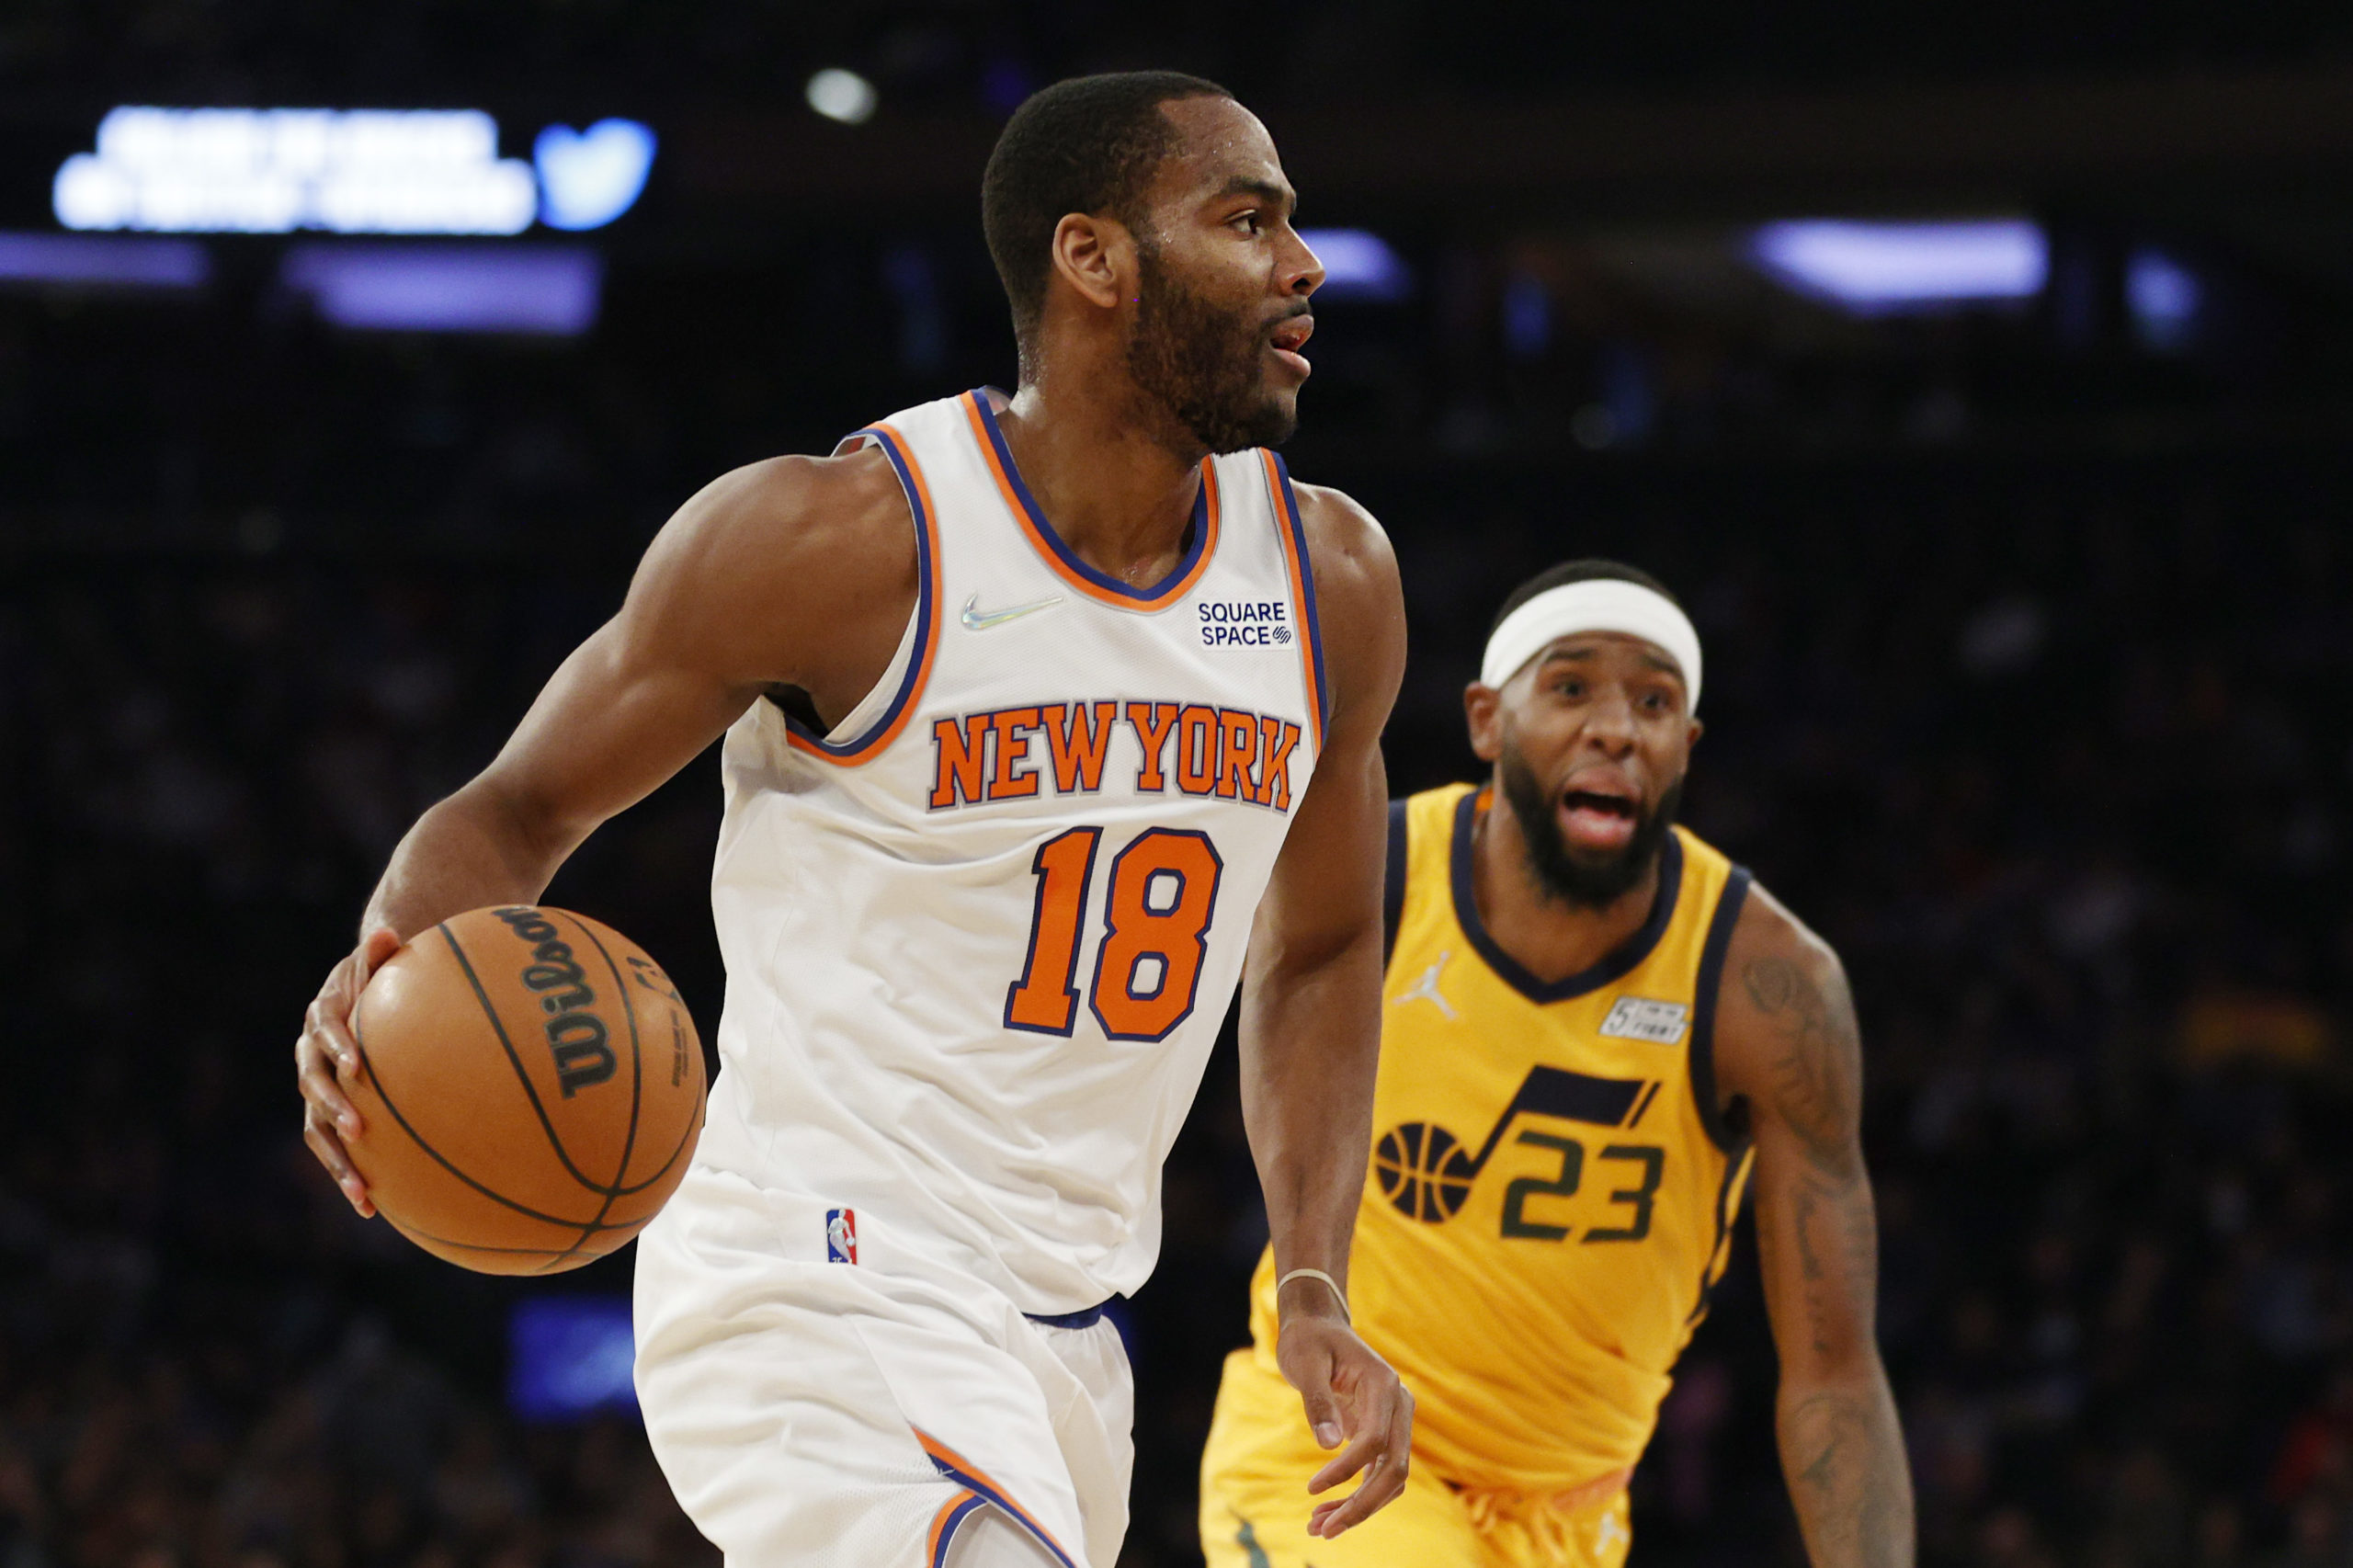 NEW YORK, NEW YORK - MARCH 20: Alec Burks #18 of the New York Knicks dribbles as Royce O'Neale #23 of the Utah Jazz defends during the first half at Madison Square Garden on March 20, 2022 in New York City. Sarah Stier/Getty Images